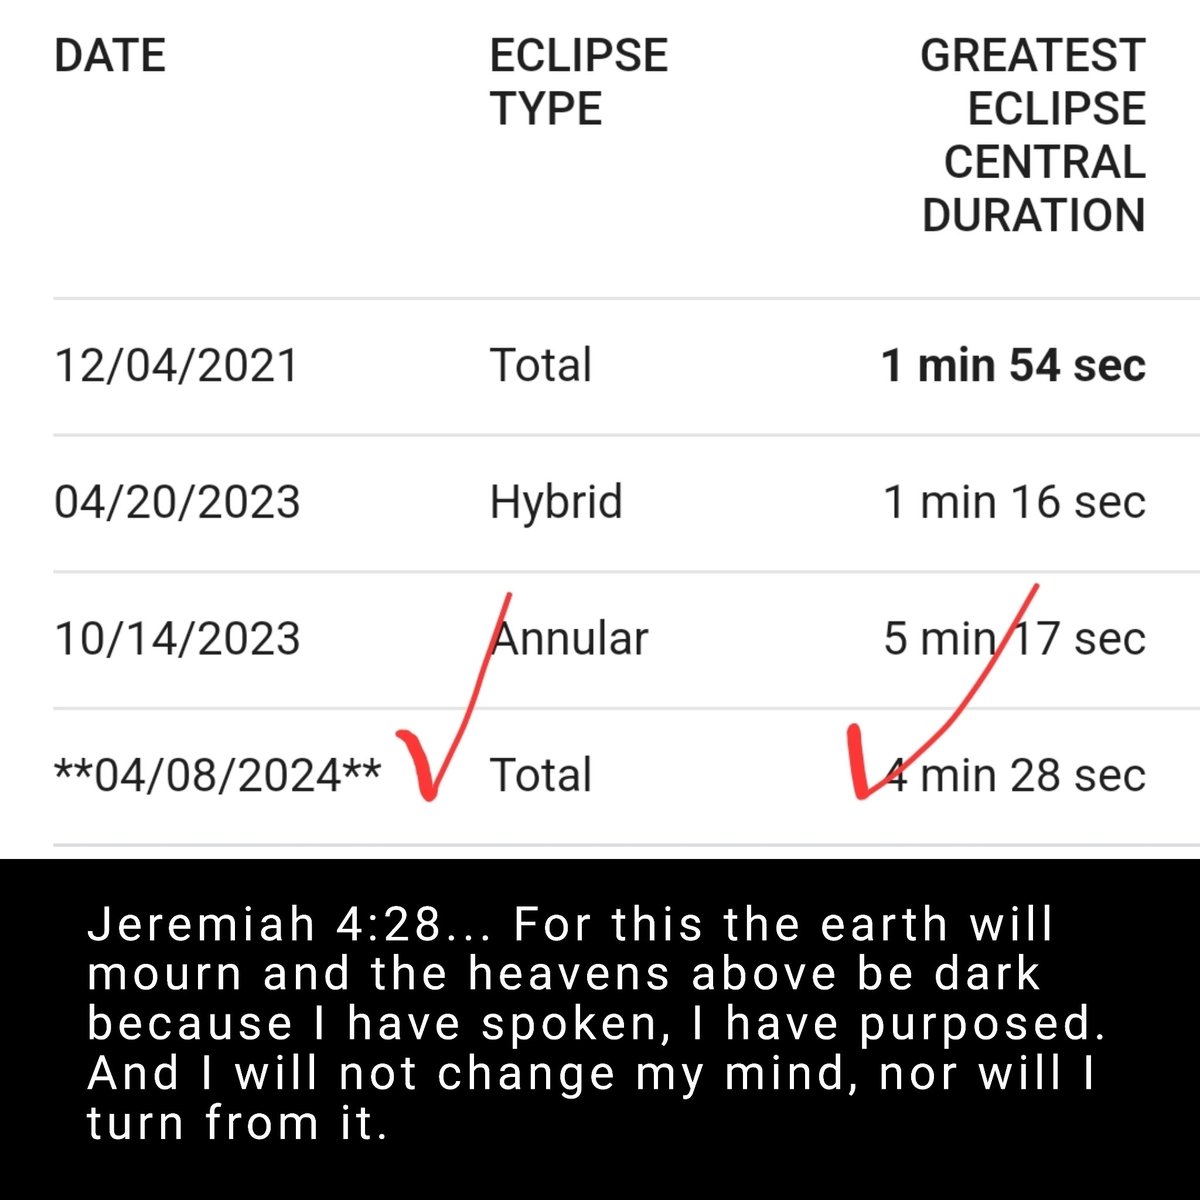 The central duration of the April 8 eclipse is 4min/28sec.  Jeremiah 4:28 talks about the sky going dark.  Coincidence??

Read all of Jeremiah chapter 4... then intercede for our nation!!!

 #WakeUpAmerica #GodIsSpeaking
#RepentAmerica
#JudgmentIsImminent